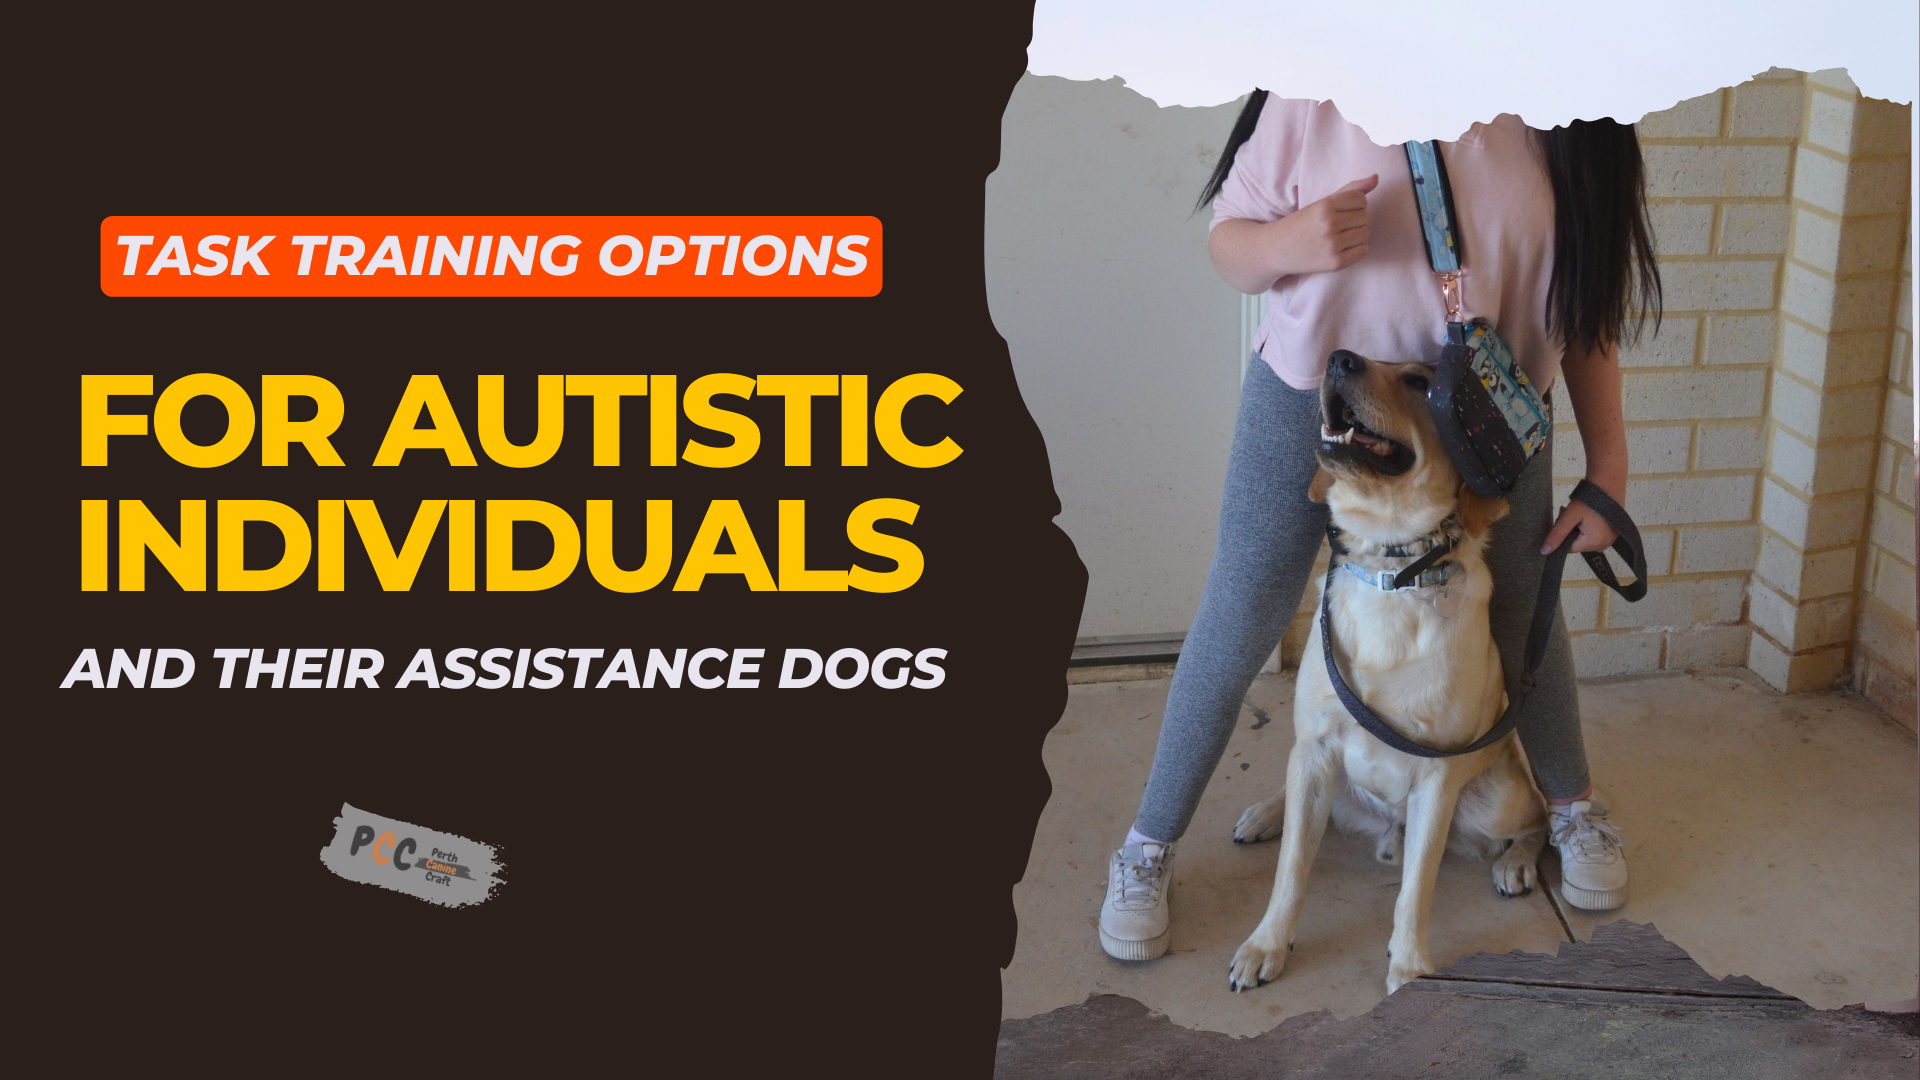 Task Training Options for Autistic Individuals and Their Assistance Dogs